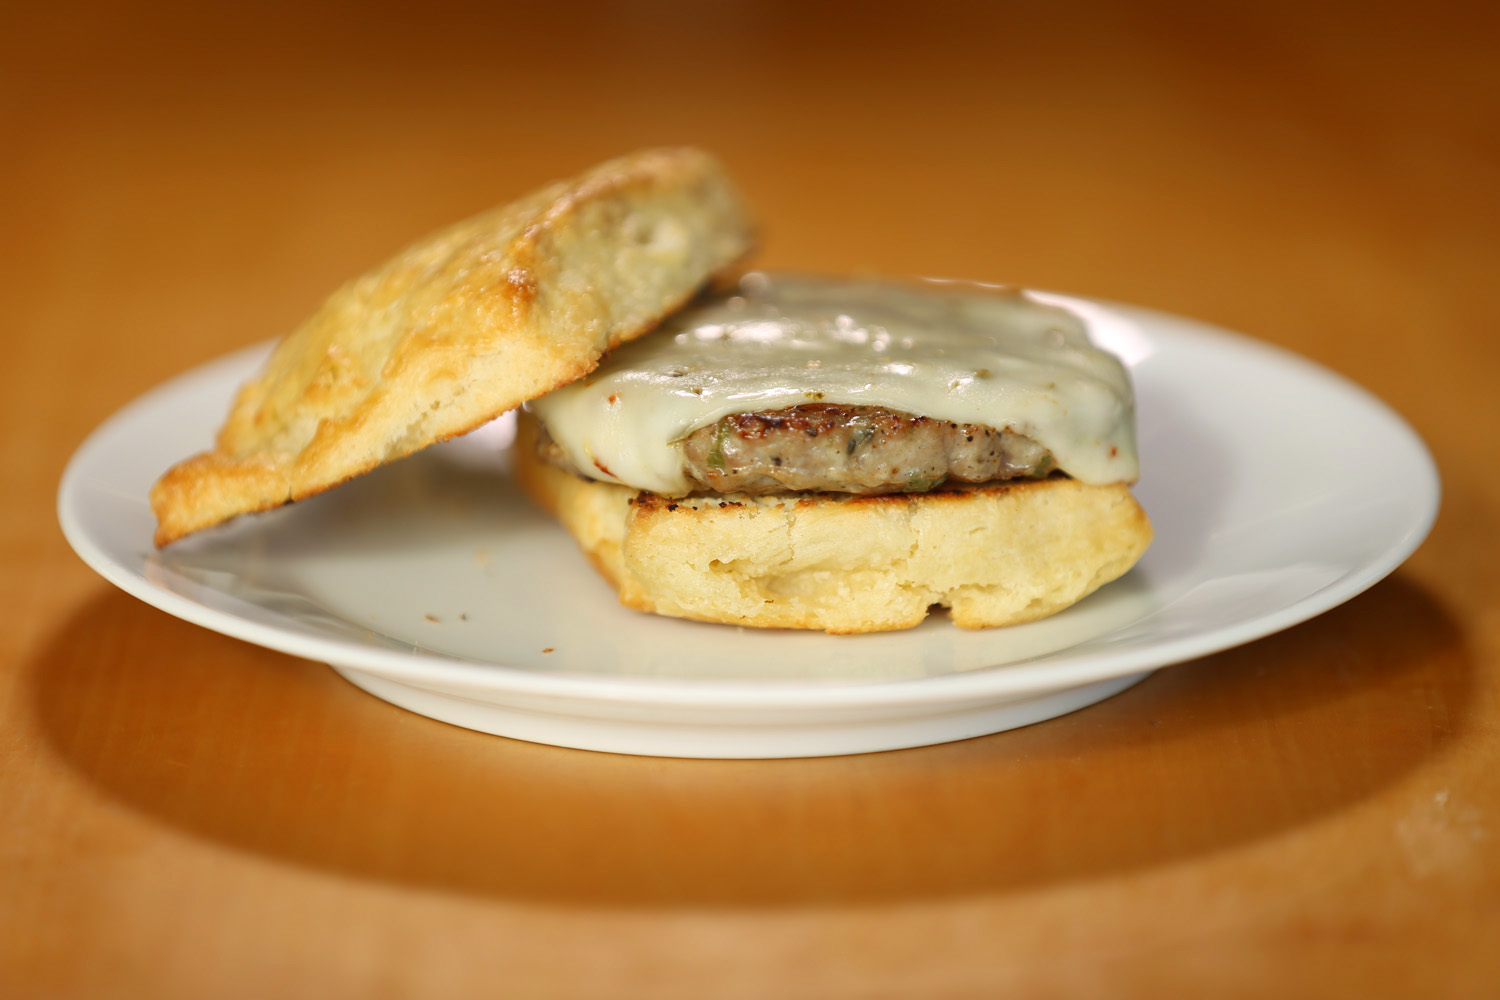 Biscuit Sandwich - Meat & Cheese